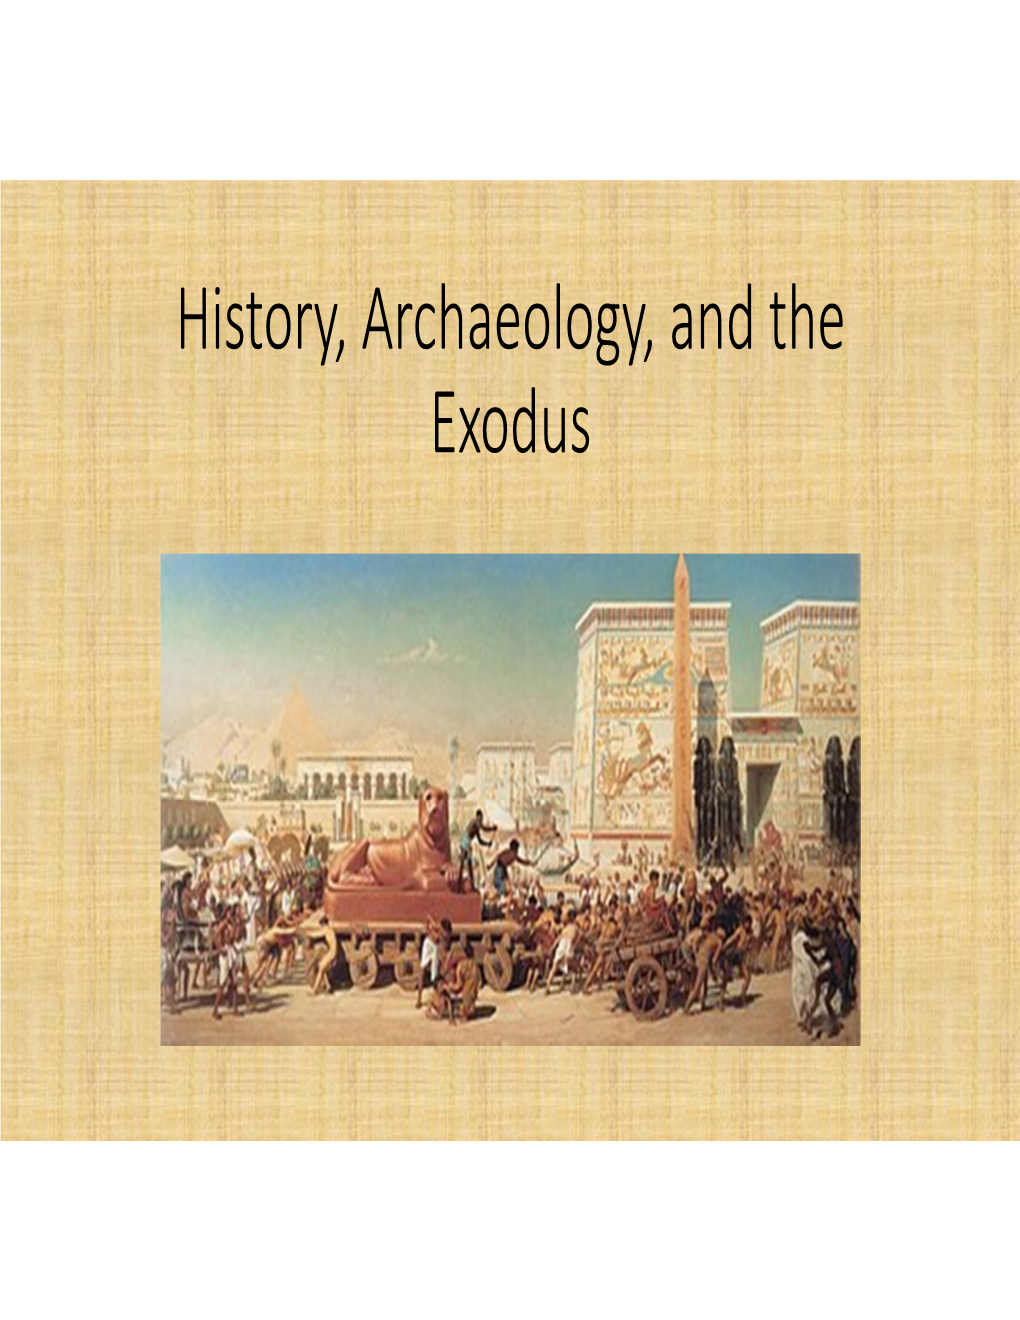 History, Archaeology, and the Exodus the Story According to the Biblical Account